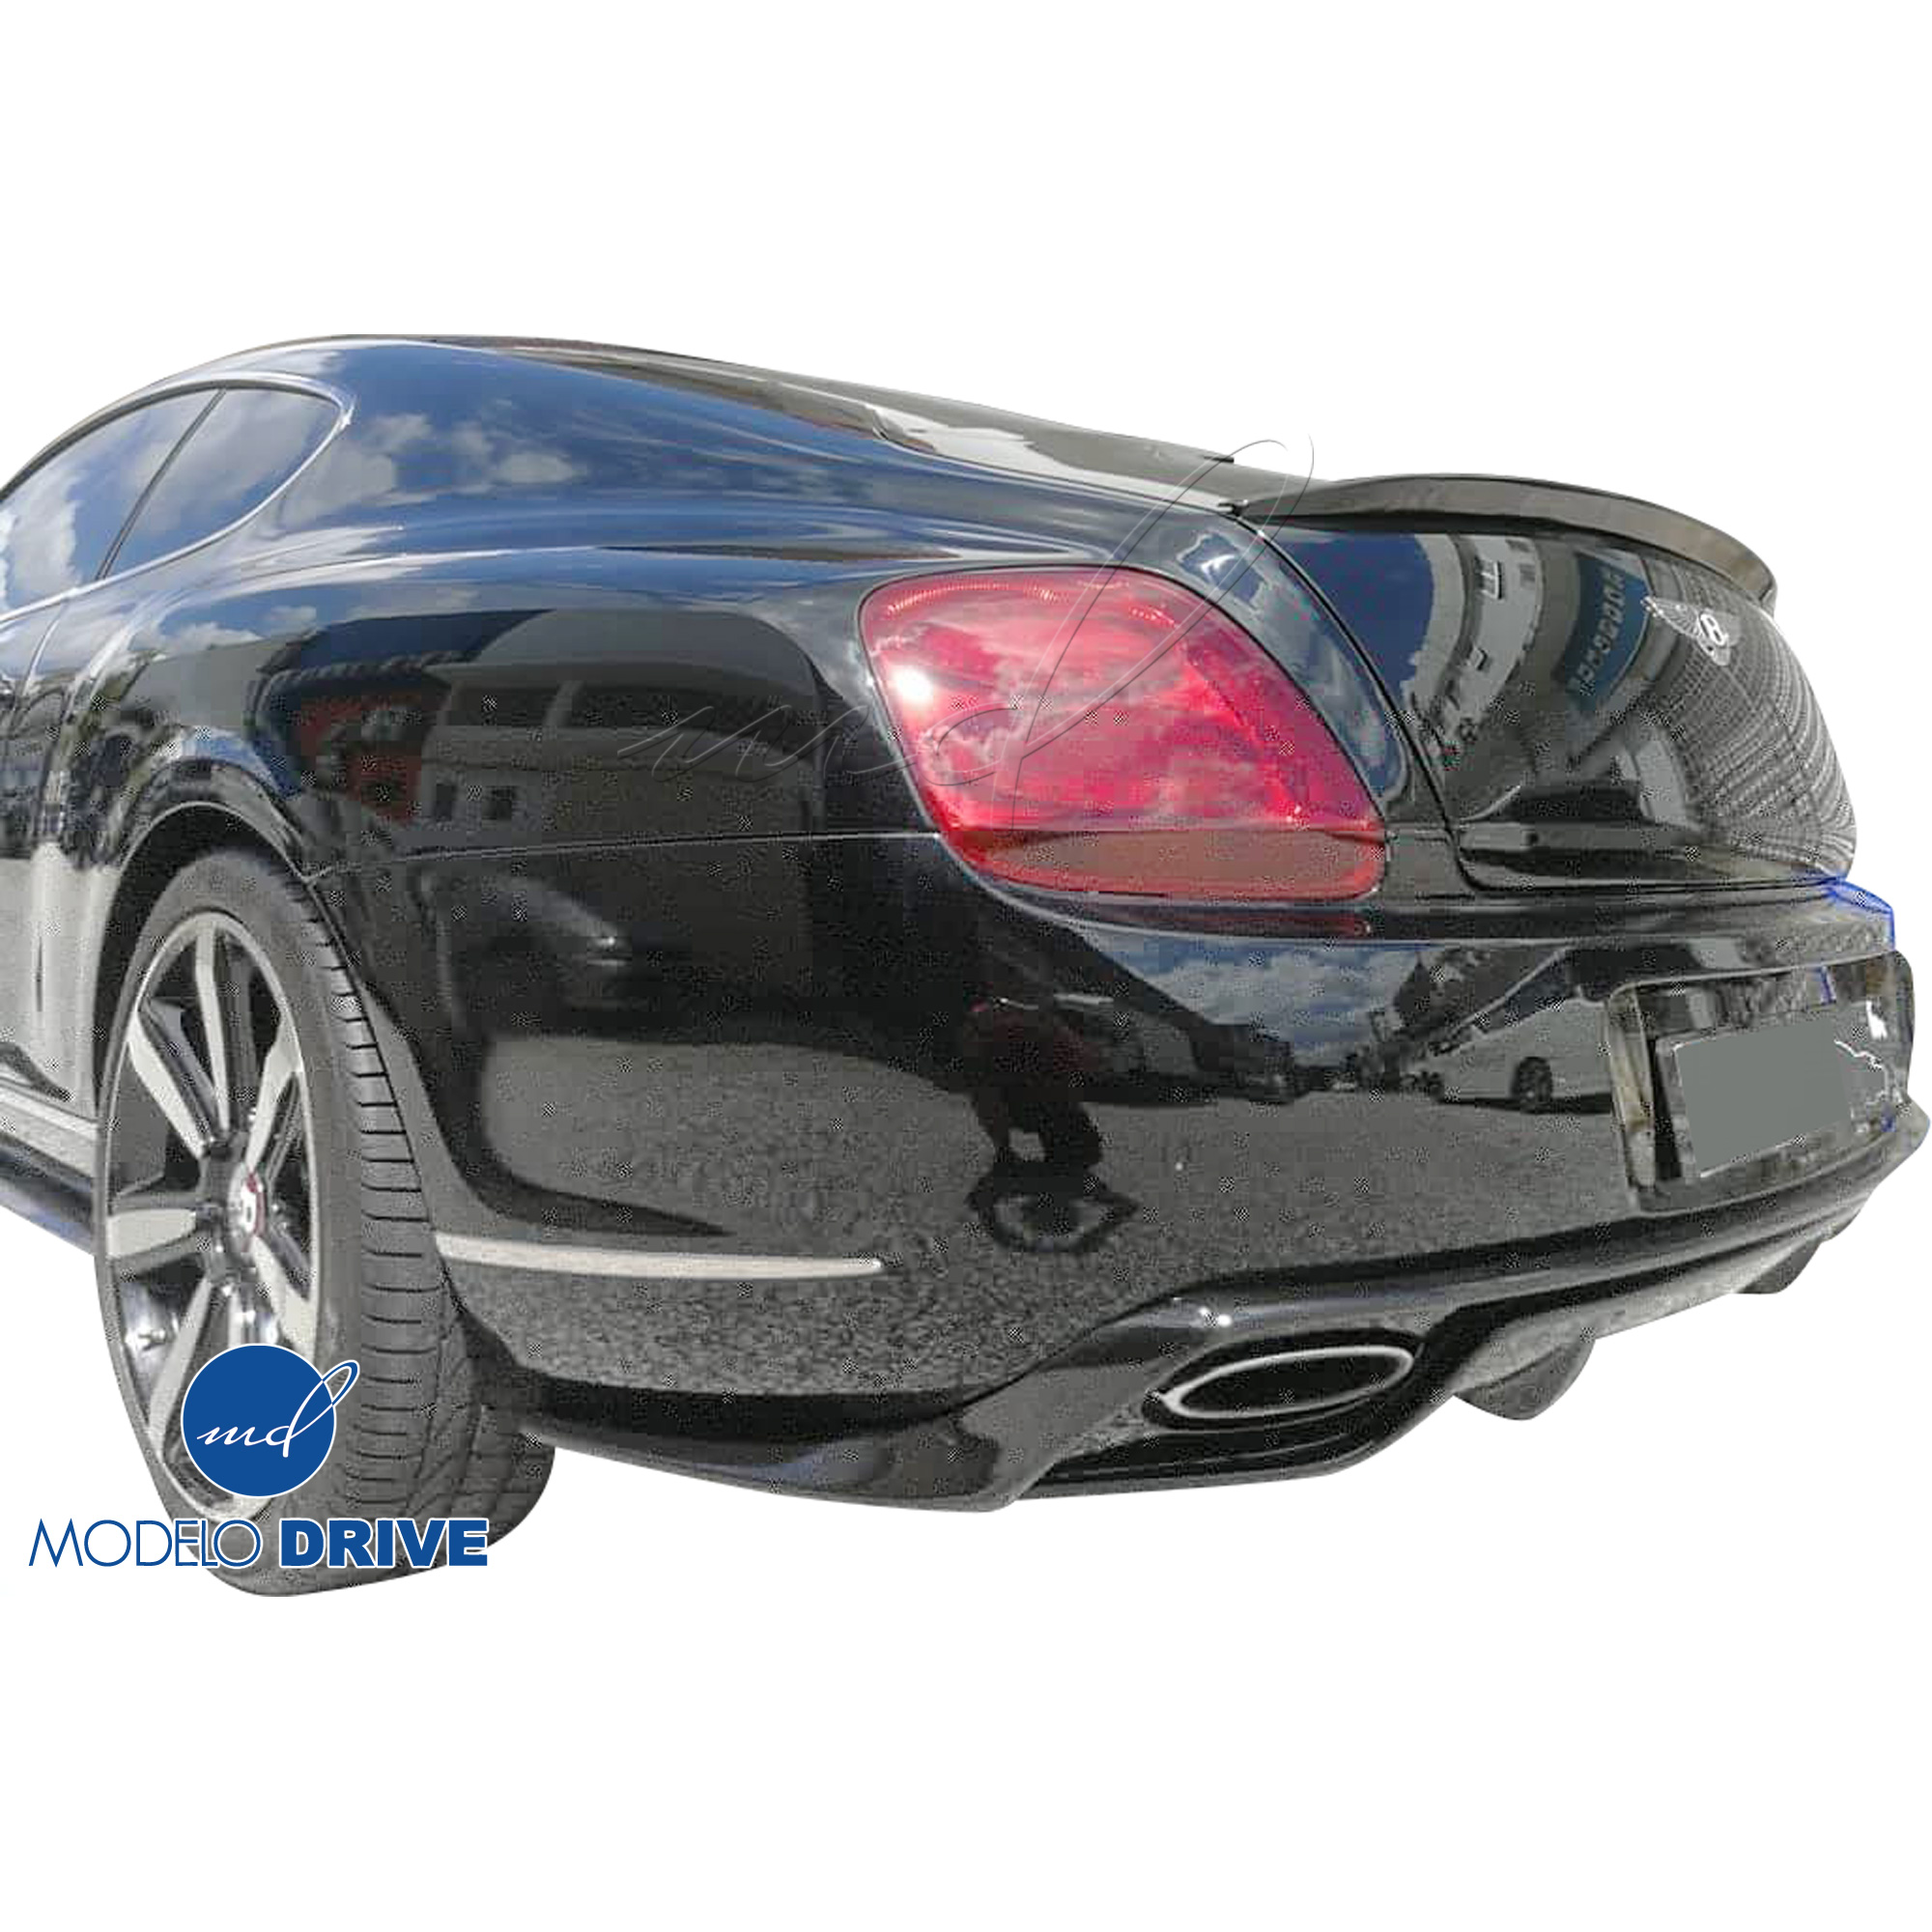 ModeloDrive Carbon Fiber MULL Rear Diffuser > Bentley Continental GT GTC 2011-2018 > 2dr Coupe - Image 4